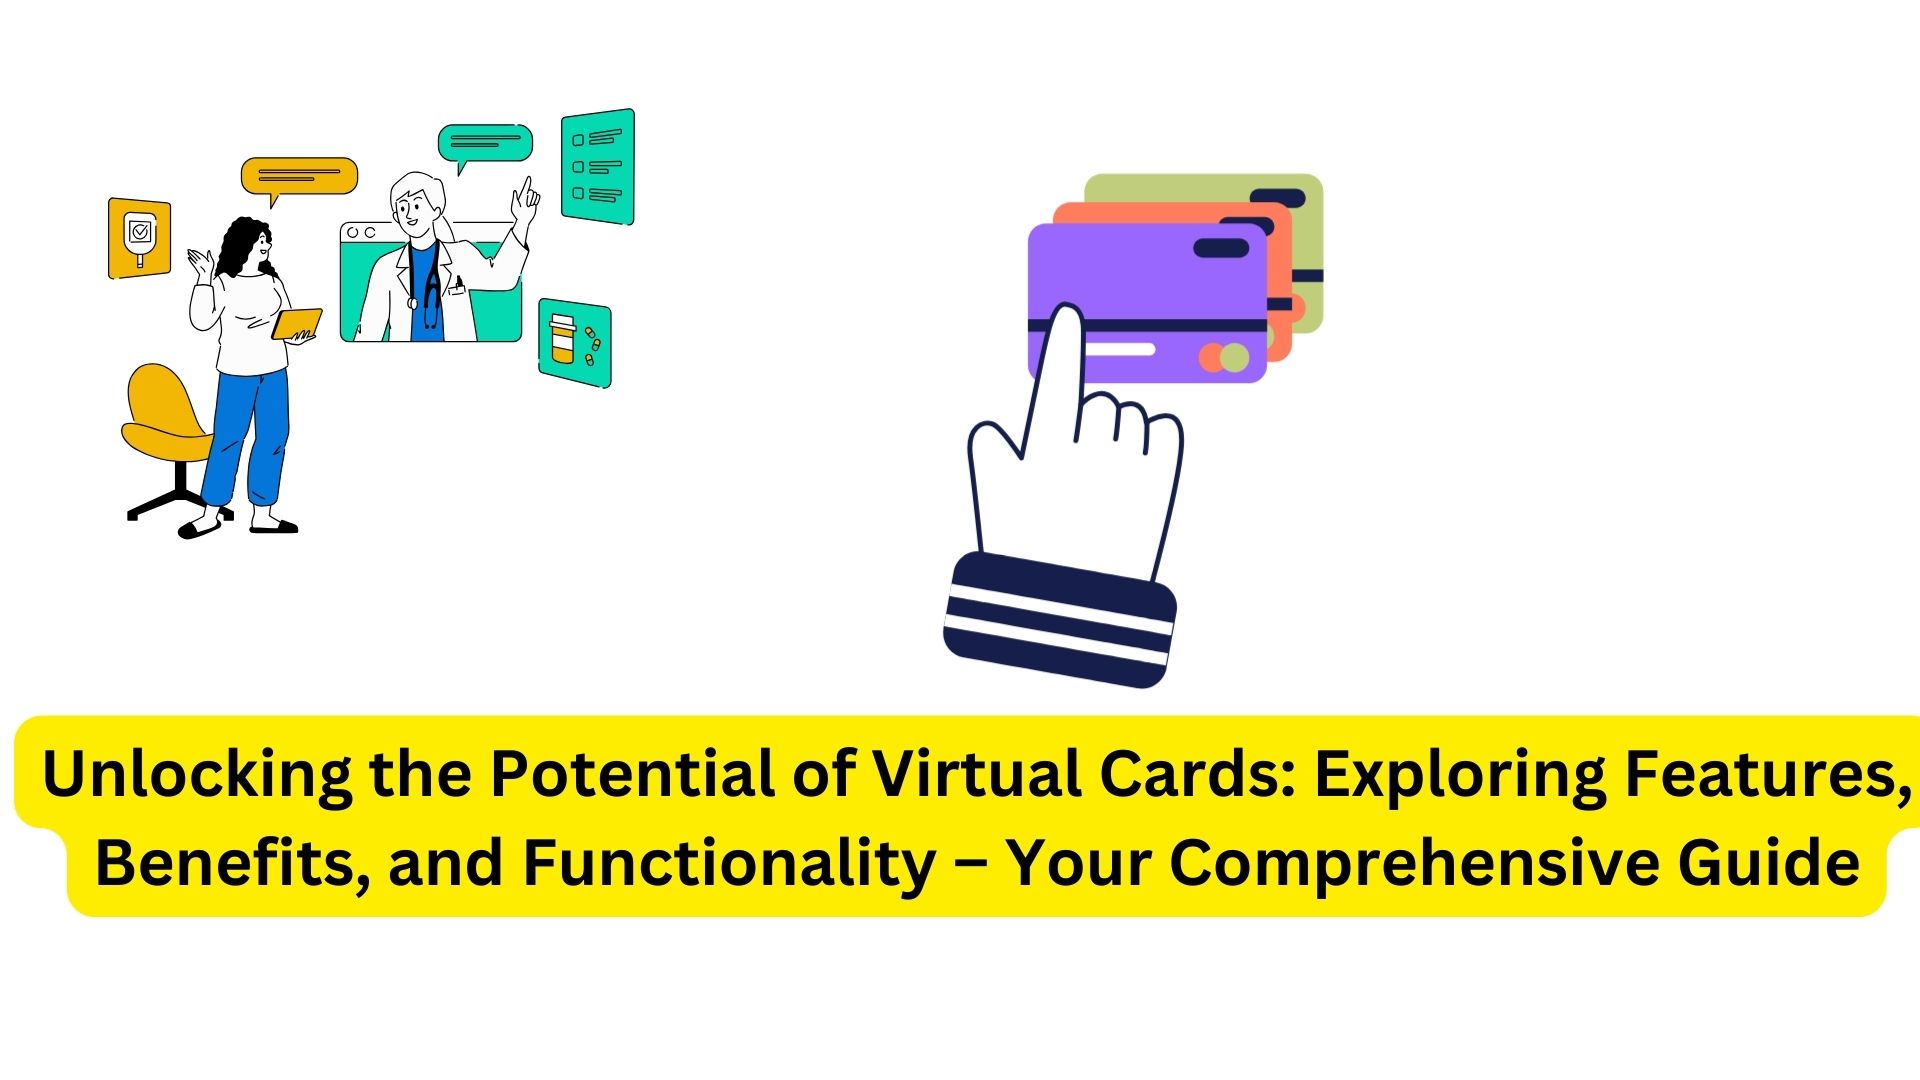 Unlocking the Potential of Virtual Cards: Exploring Features, Benefits, and Functionality – Your Comprehensive Guide